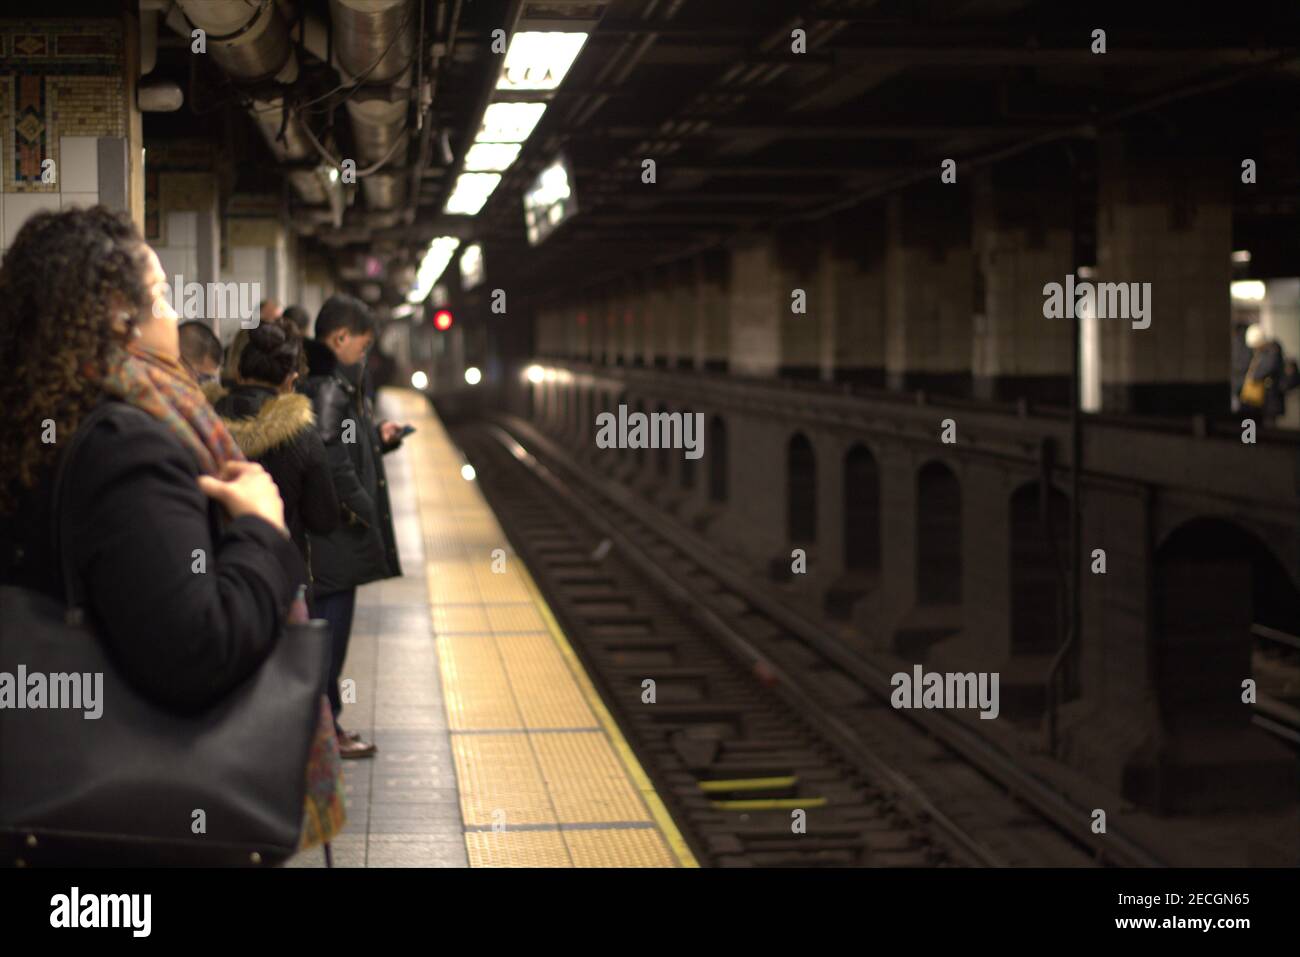 The platform bystanders at the Grand Central station in Midtown Manhattan, New York. Stock Photo